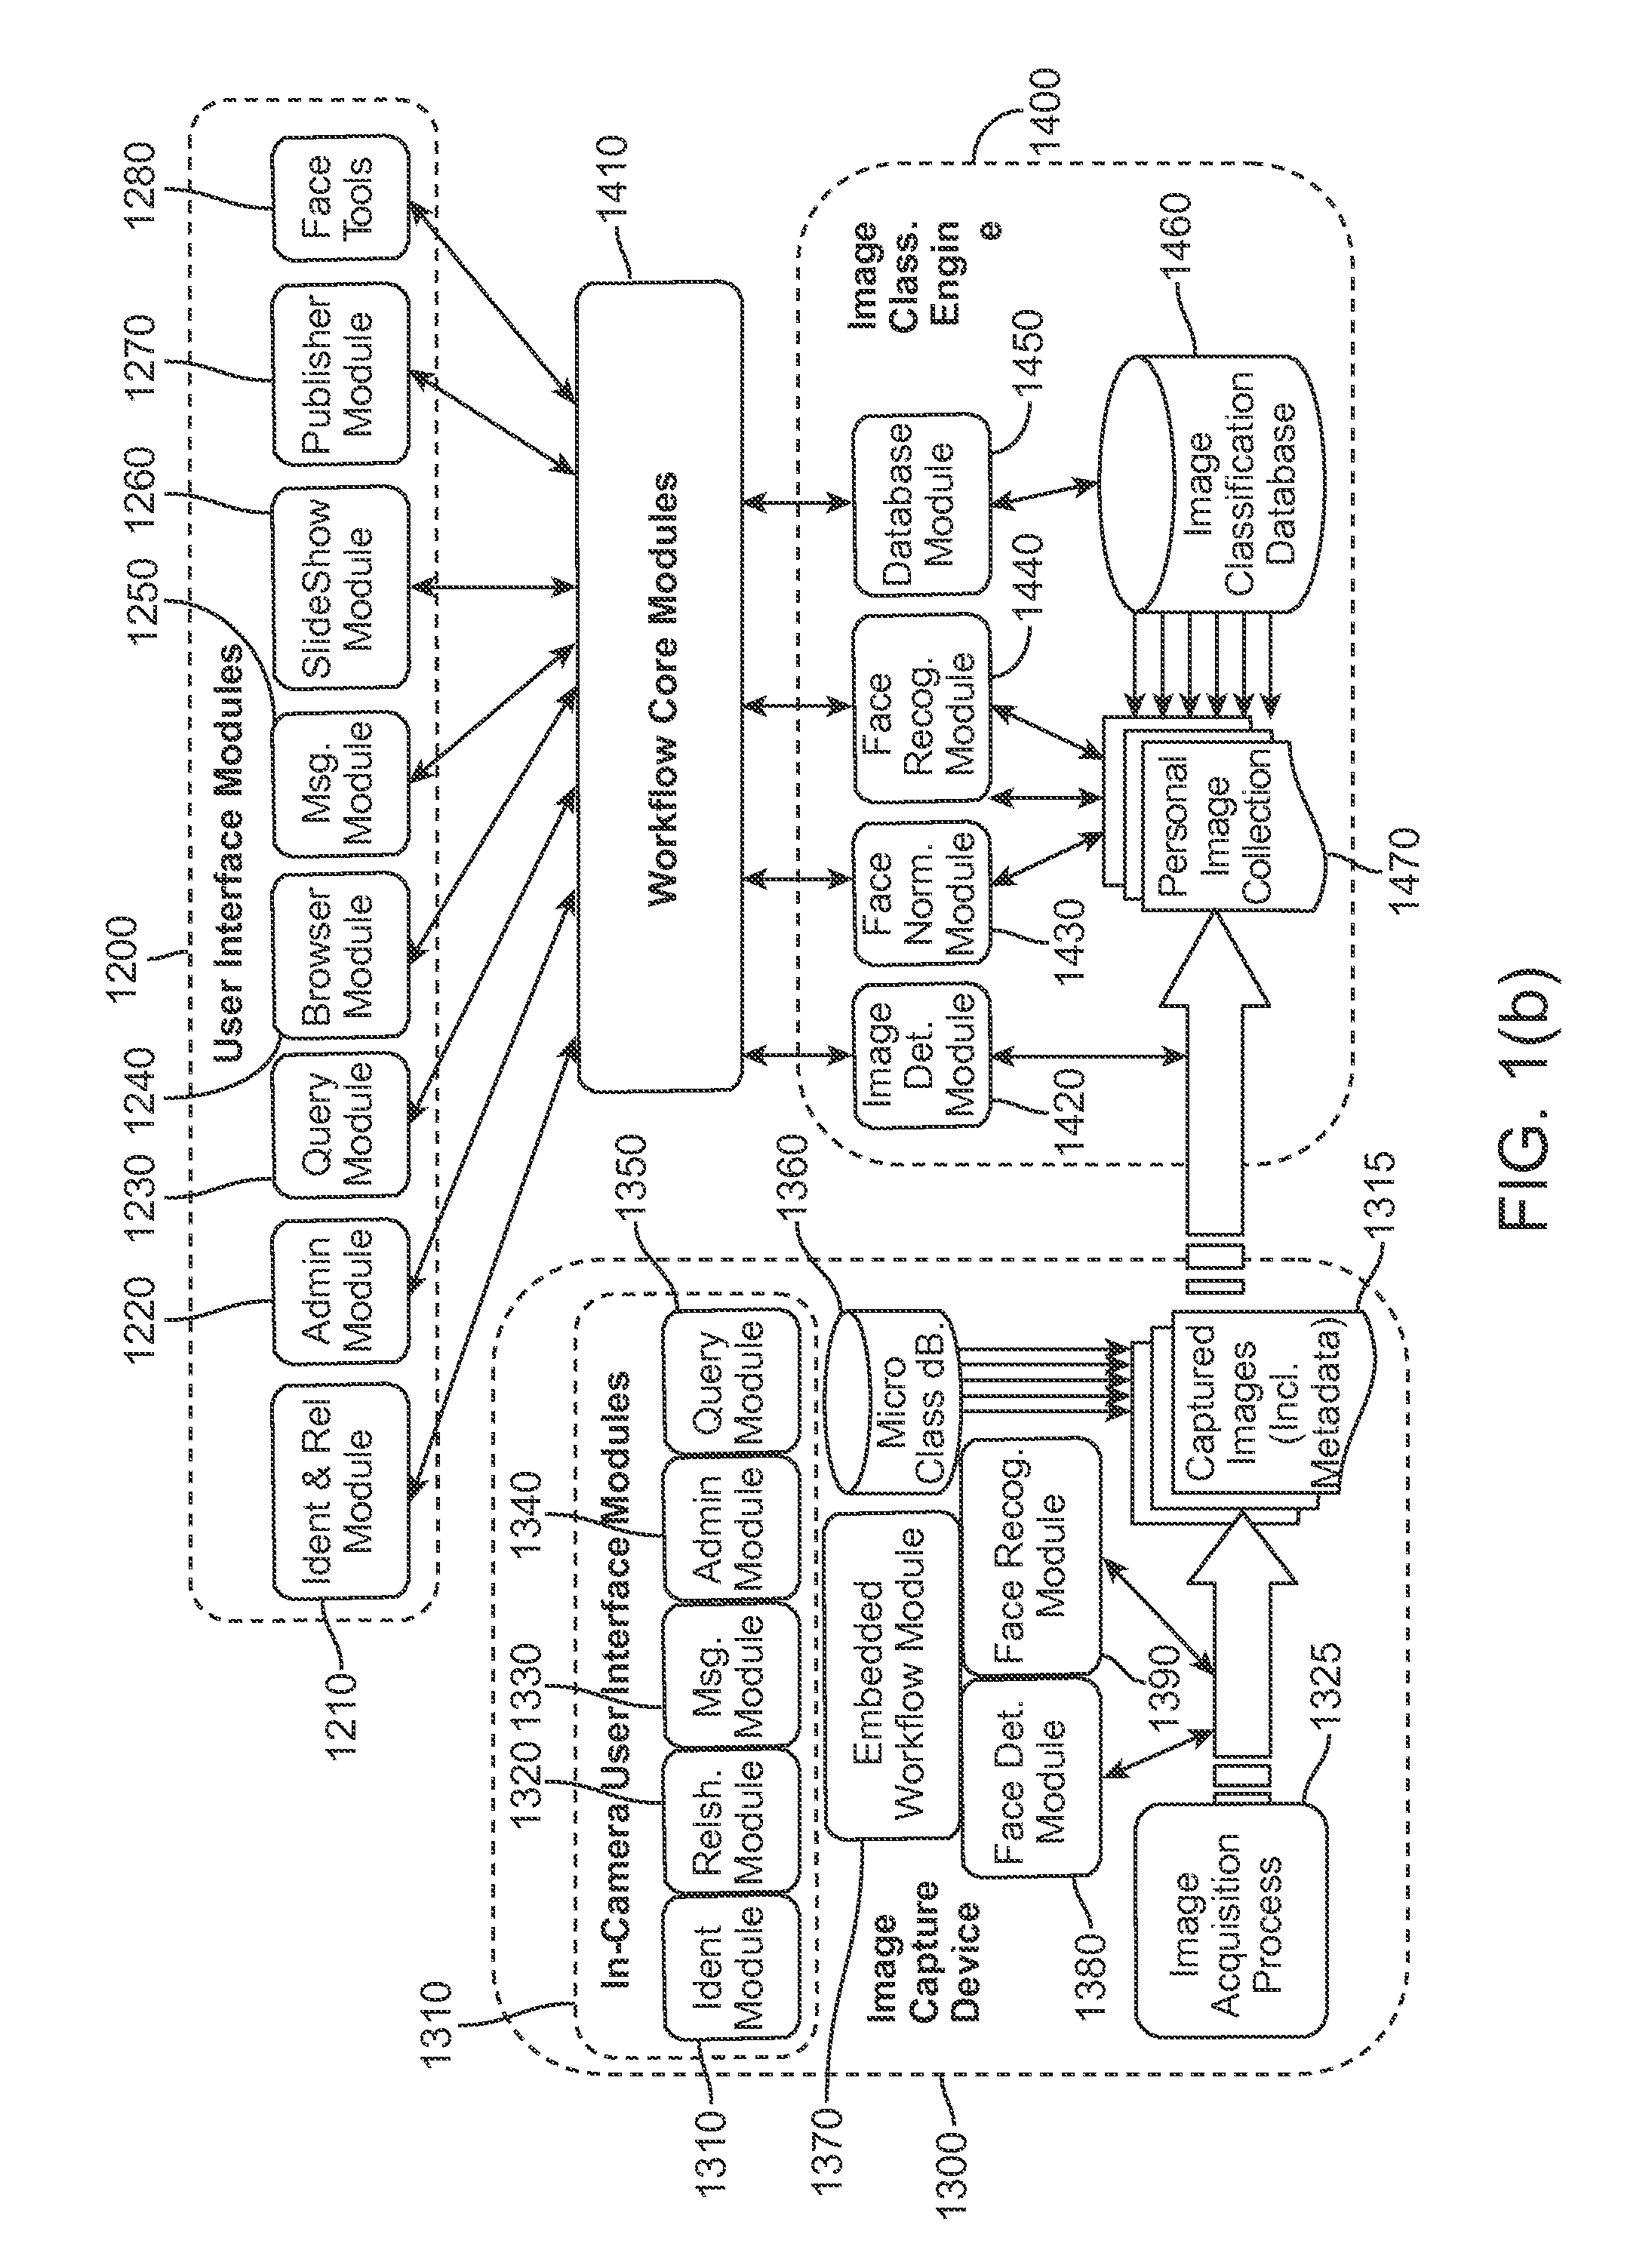 Classification and organization of consumer digital images using workflow, and face detection and recognition